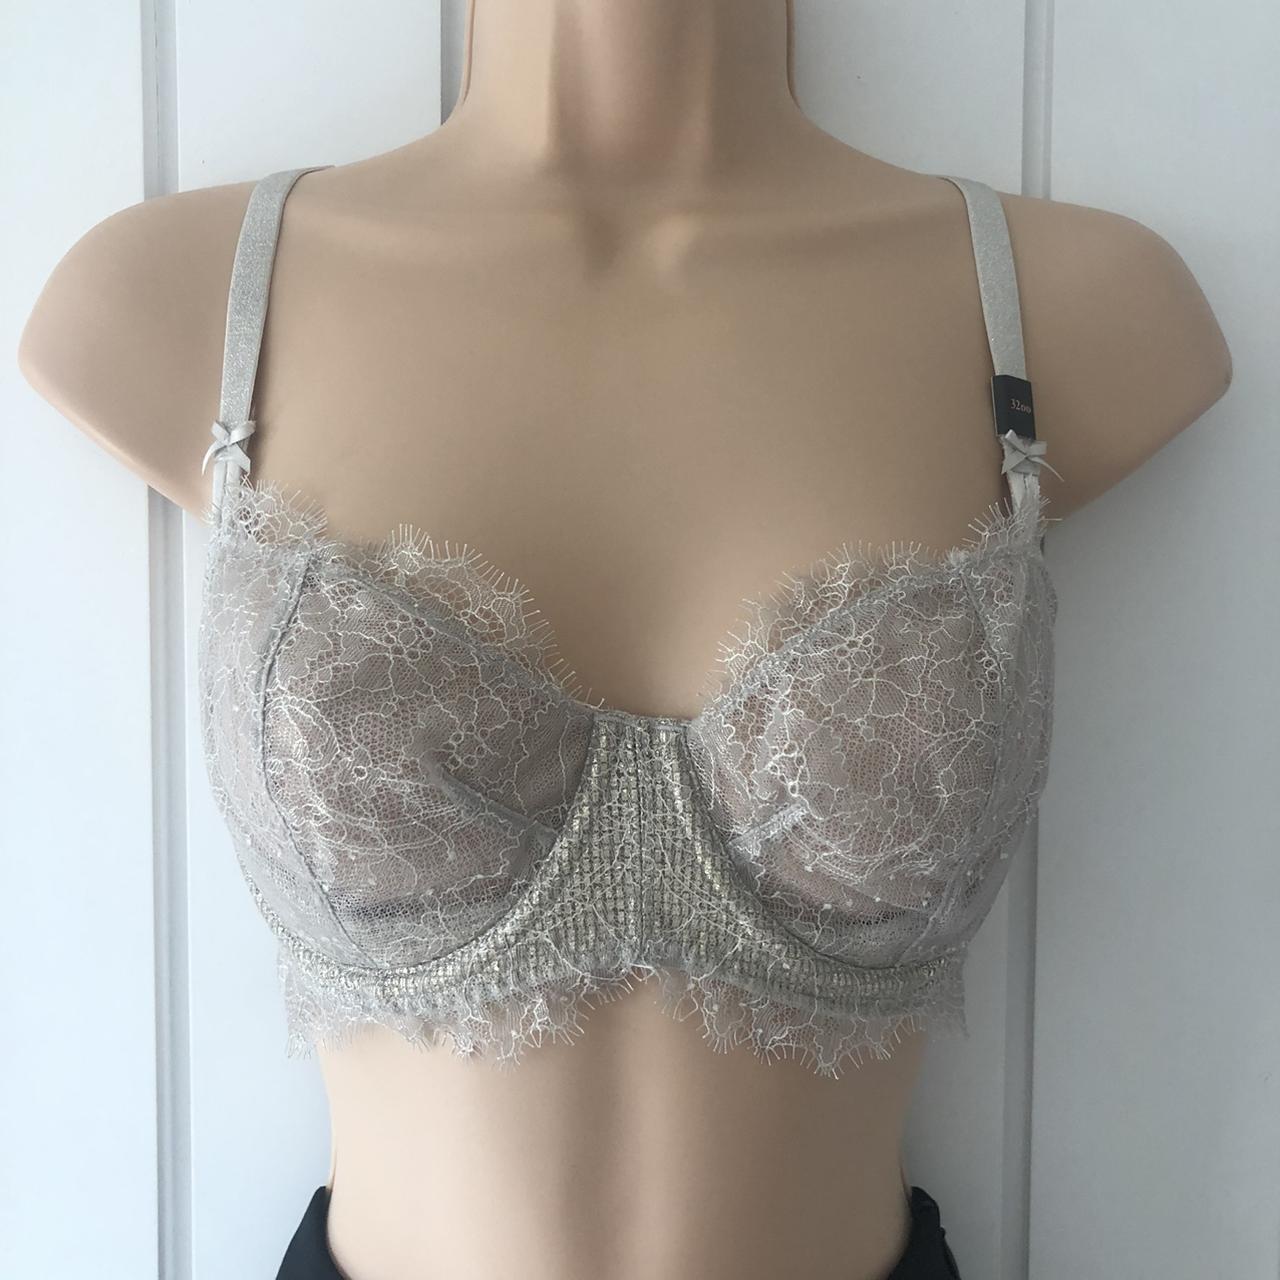 Dream Angels Push-Up Bra - New with Tags